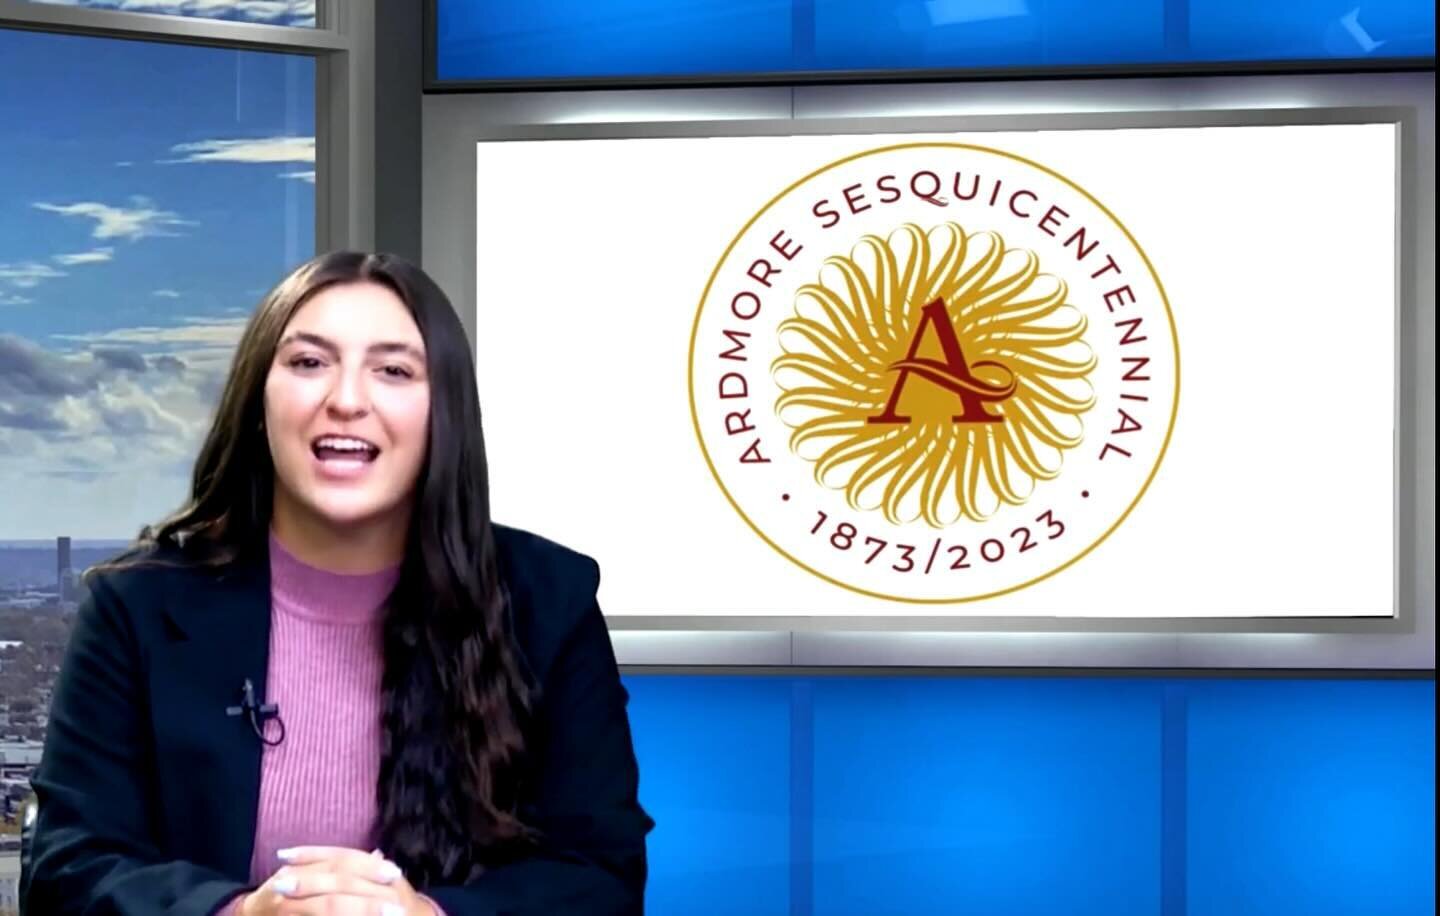 Somehow missed this back in August: LMTV highlighted the #ArdmoreSesquicentennial events and projects, including our #WindowsIntoHistory installations, the #ExploreHistoricArdmore Storymap, and a certain handsome sun/flower #logo. #civicdesign #logod